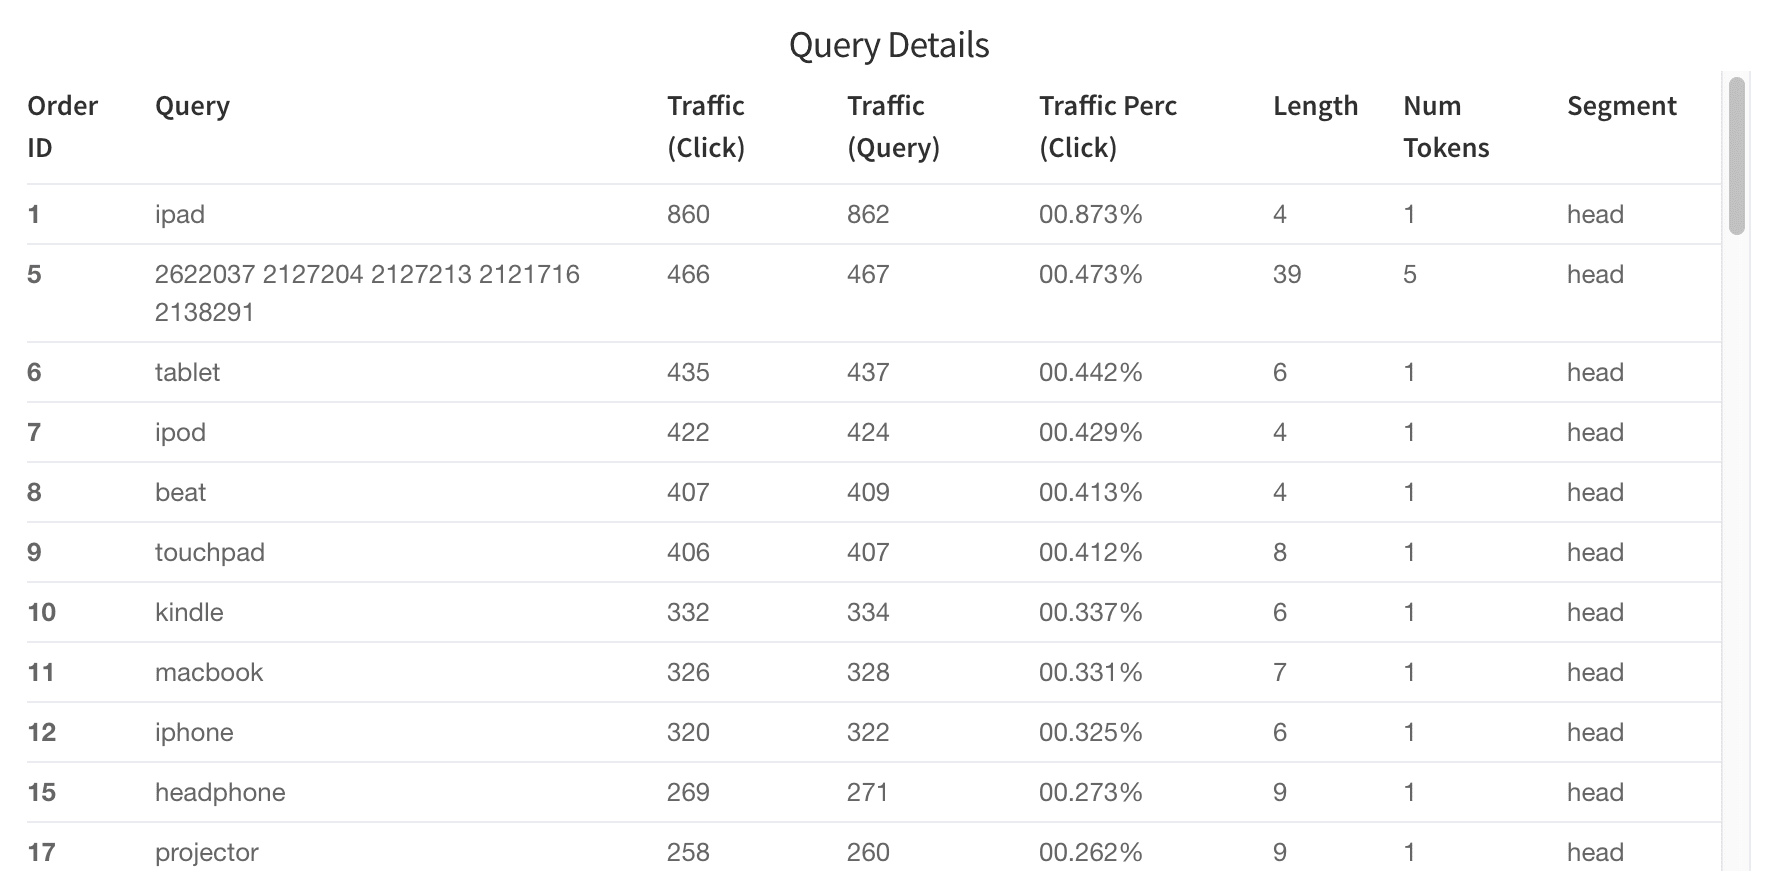 Query Details table